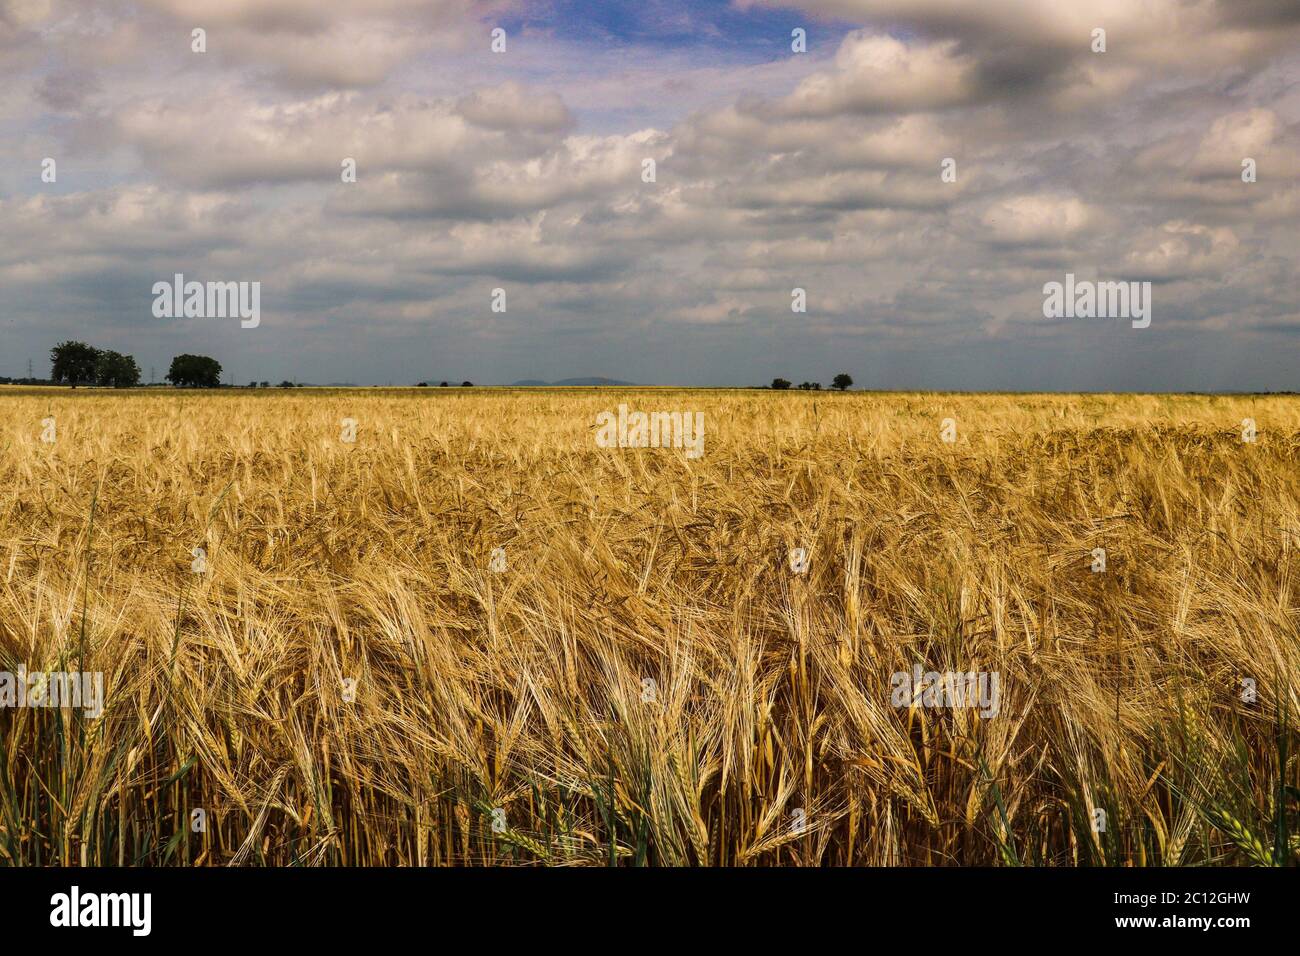 Field with golden grain on a cloudy day before a storm in Austria Stock Photo